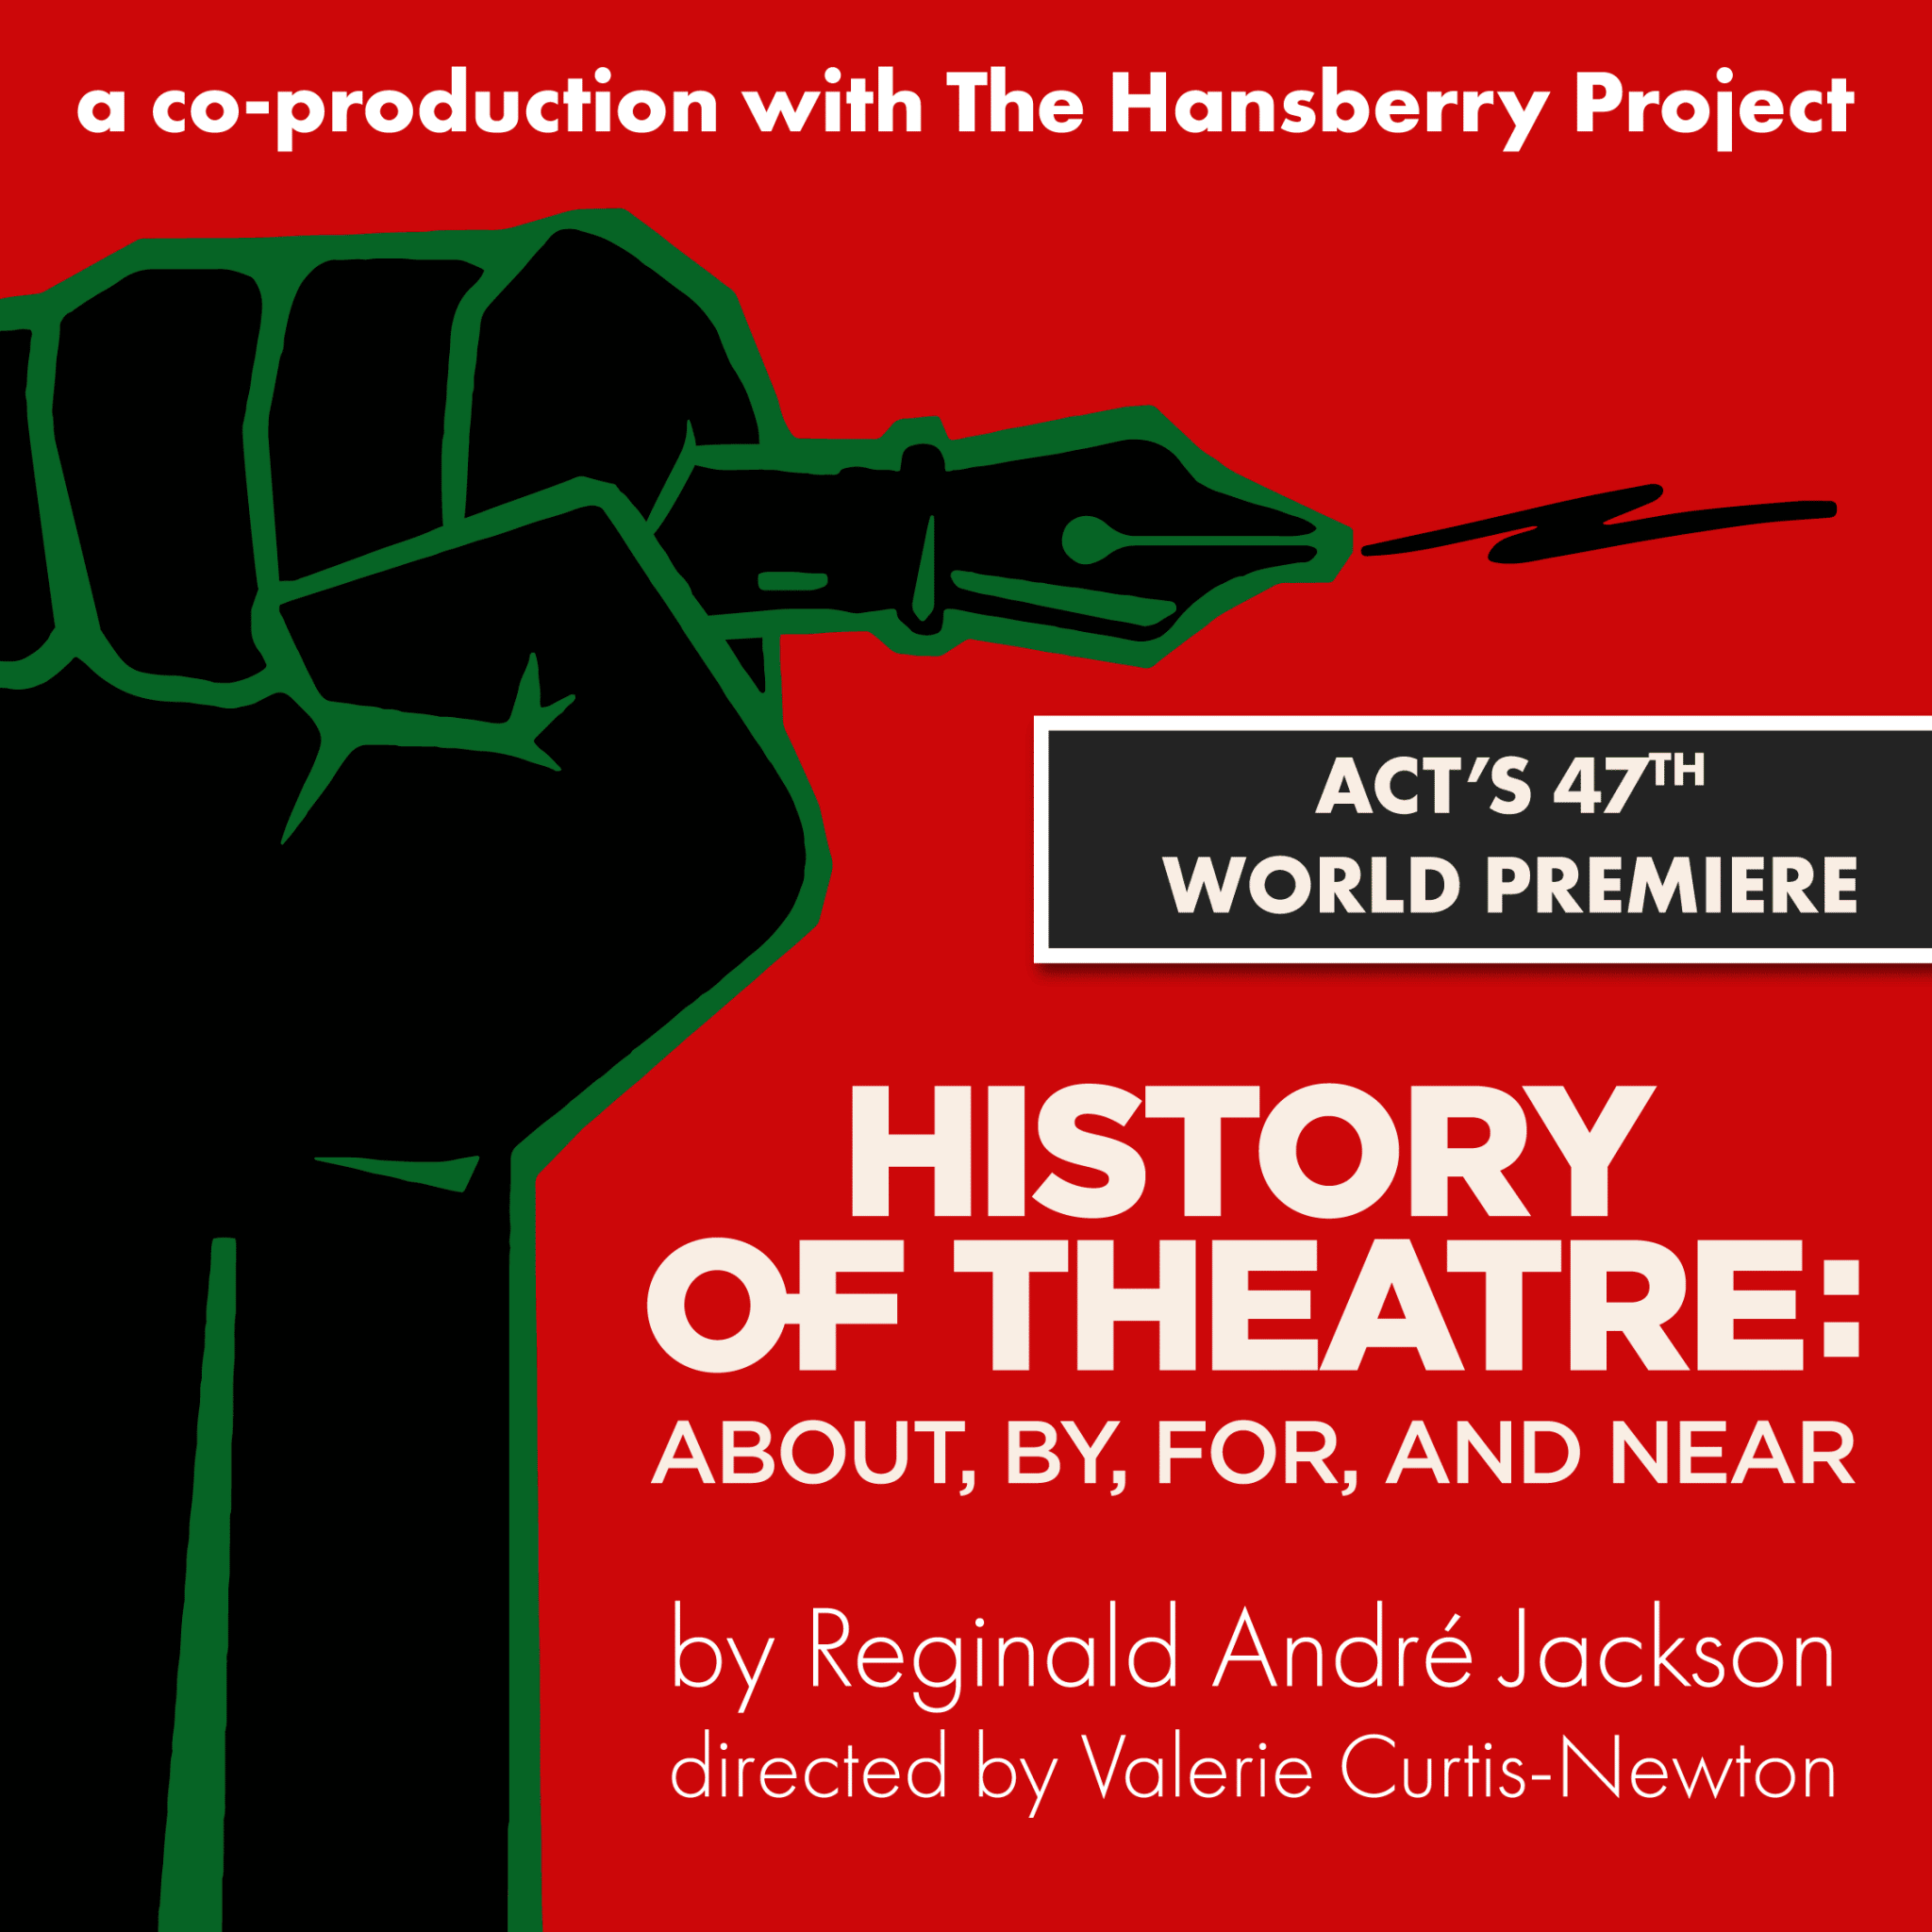 ACT’s 47th World Premiere History of Theatre: About, By, For and Near Written by Reginald André Jackson Directed by Valerie Curtis-Newton Produced in partnership with The Hansberry Project 